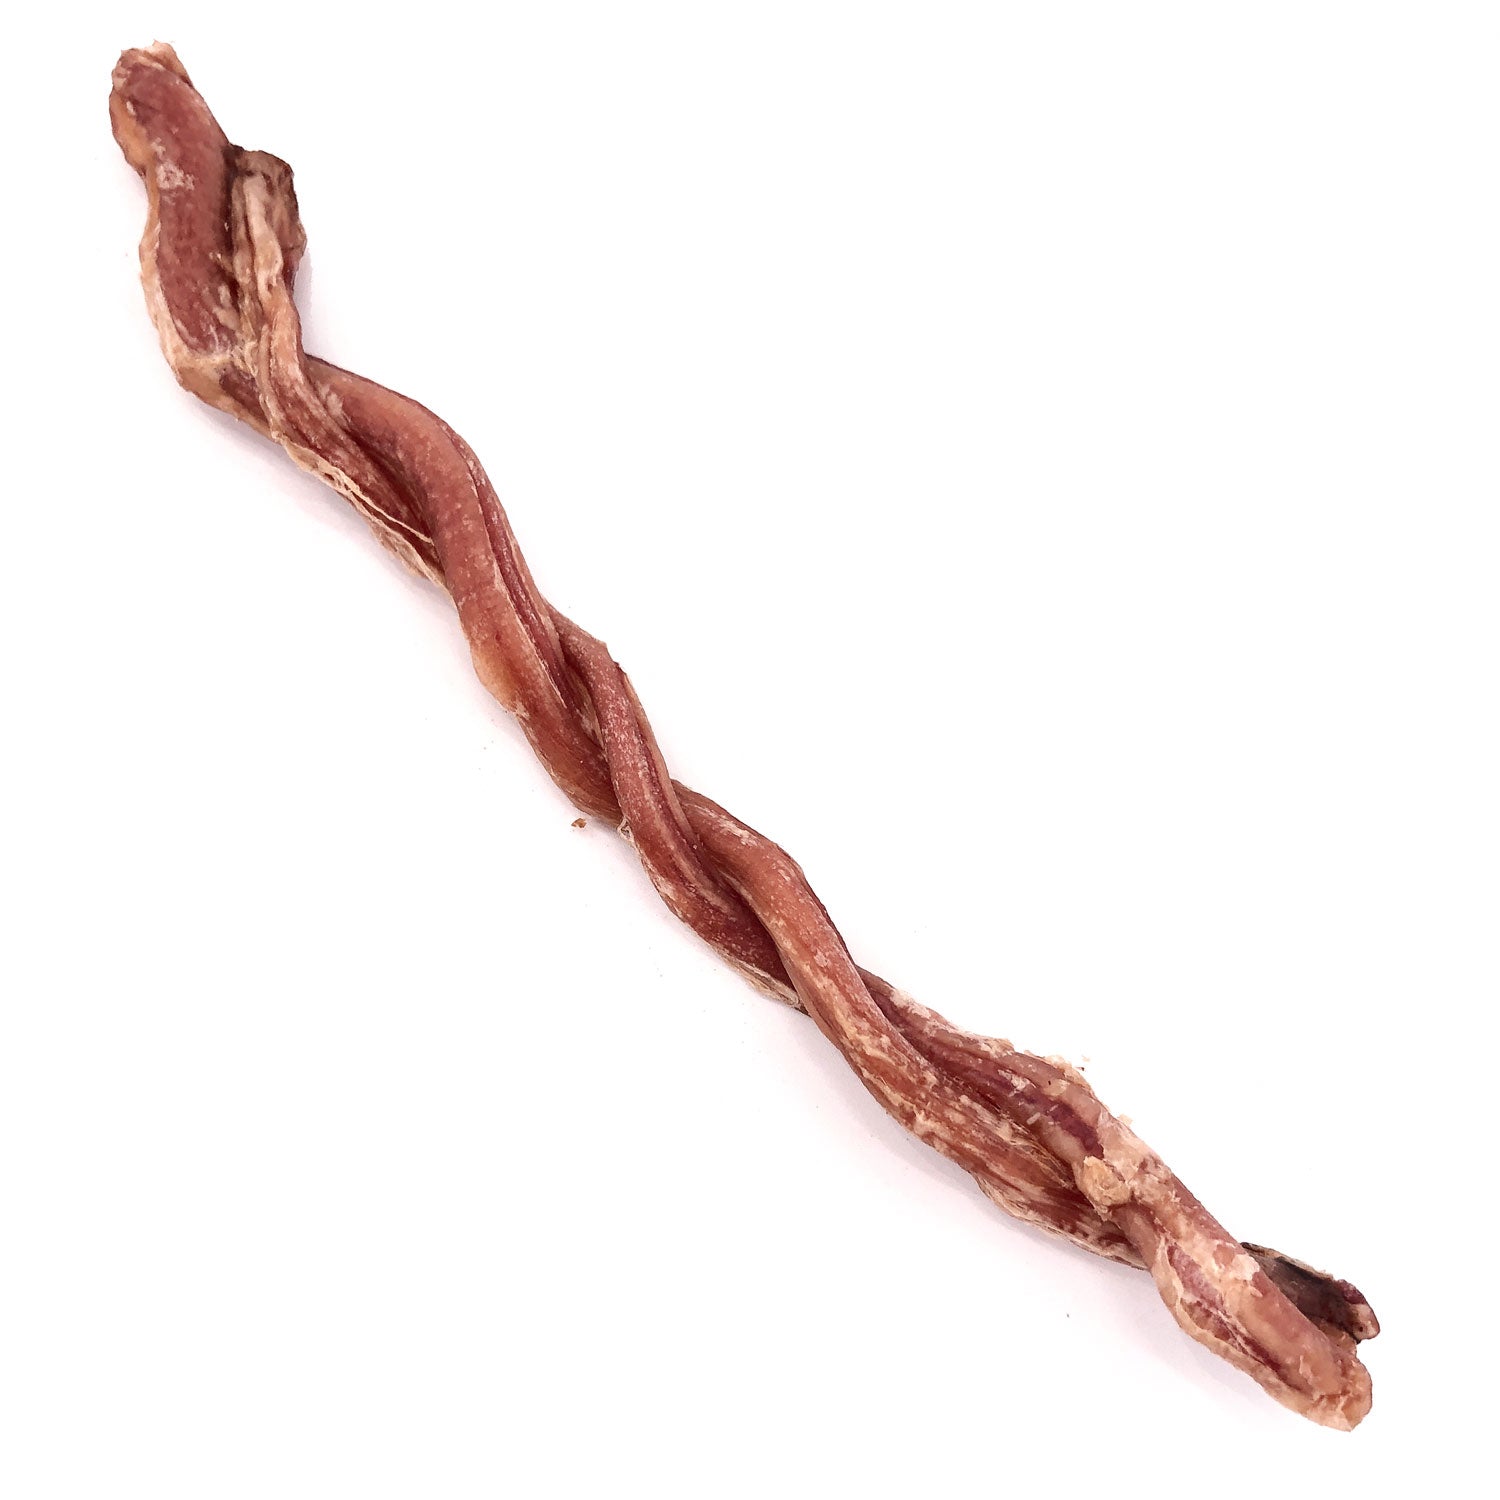 ValueBull USA Lamb Pizzle Twist Dog Chews, 6 Inch, 10 Count